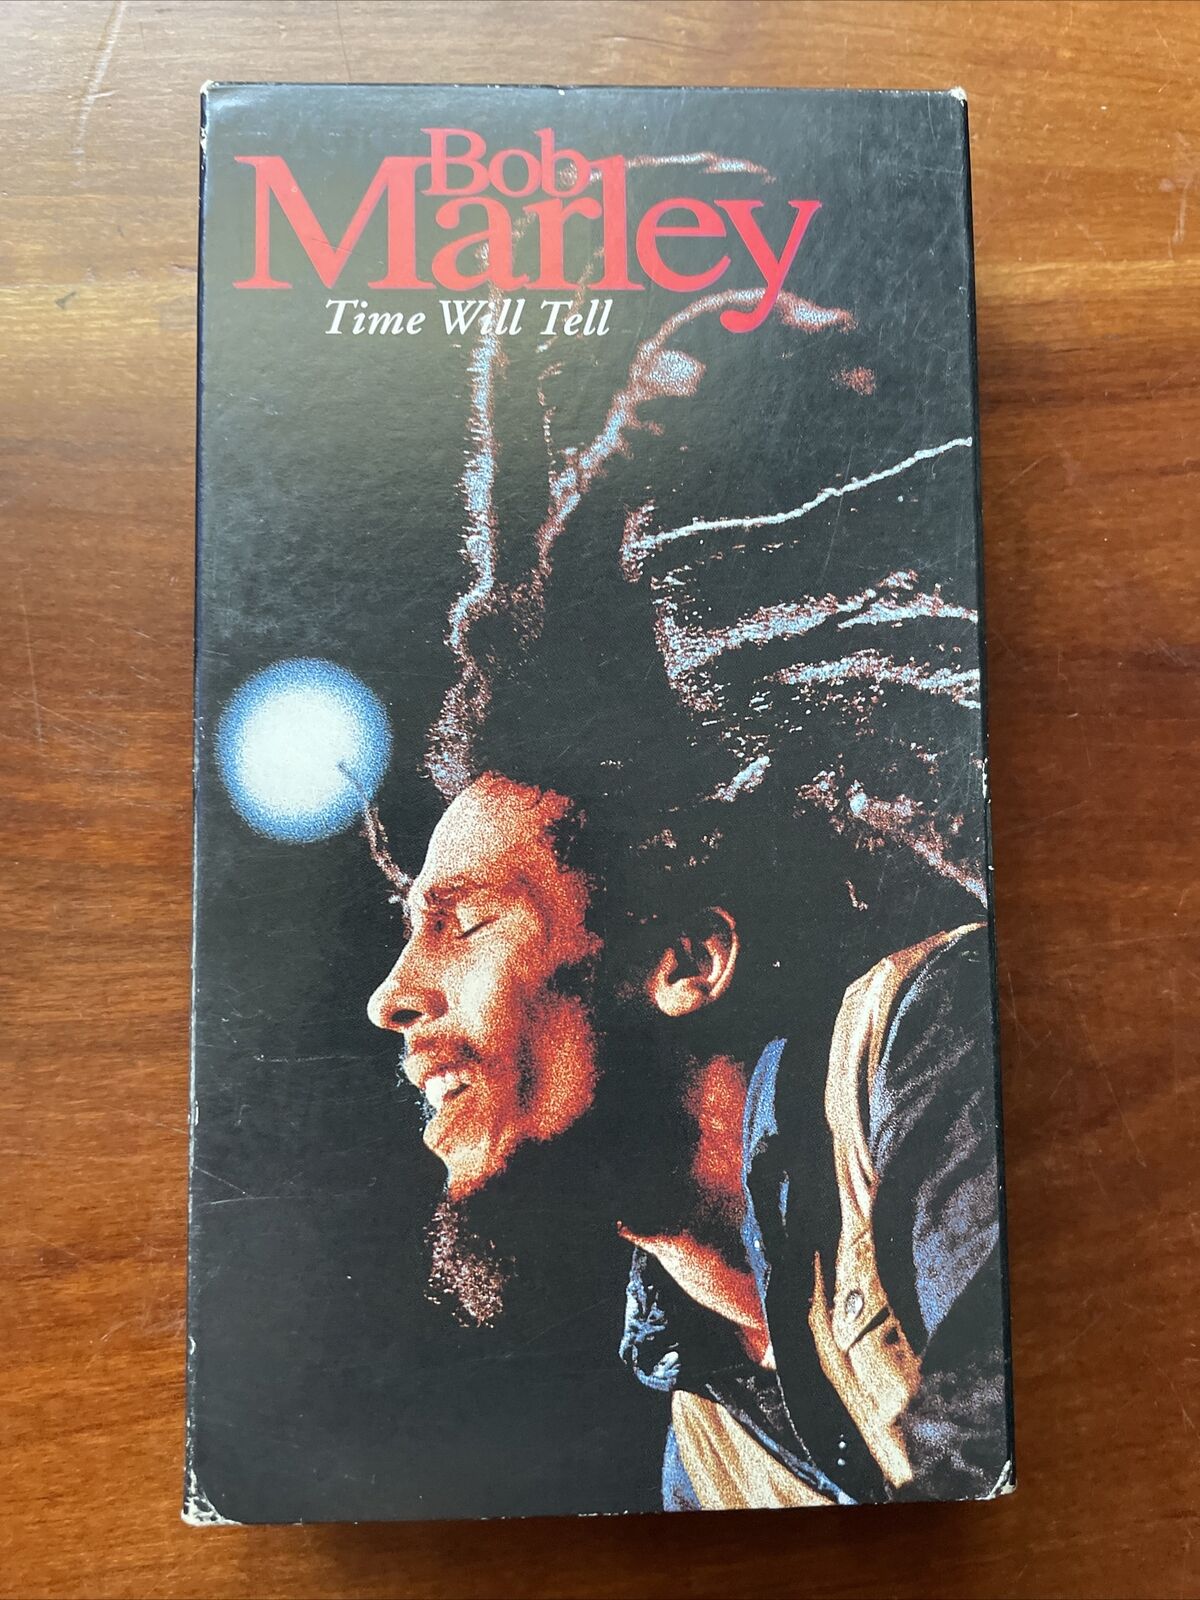 Bob Marley- Time Will Tell - Darkside Records